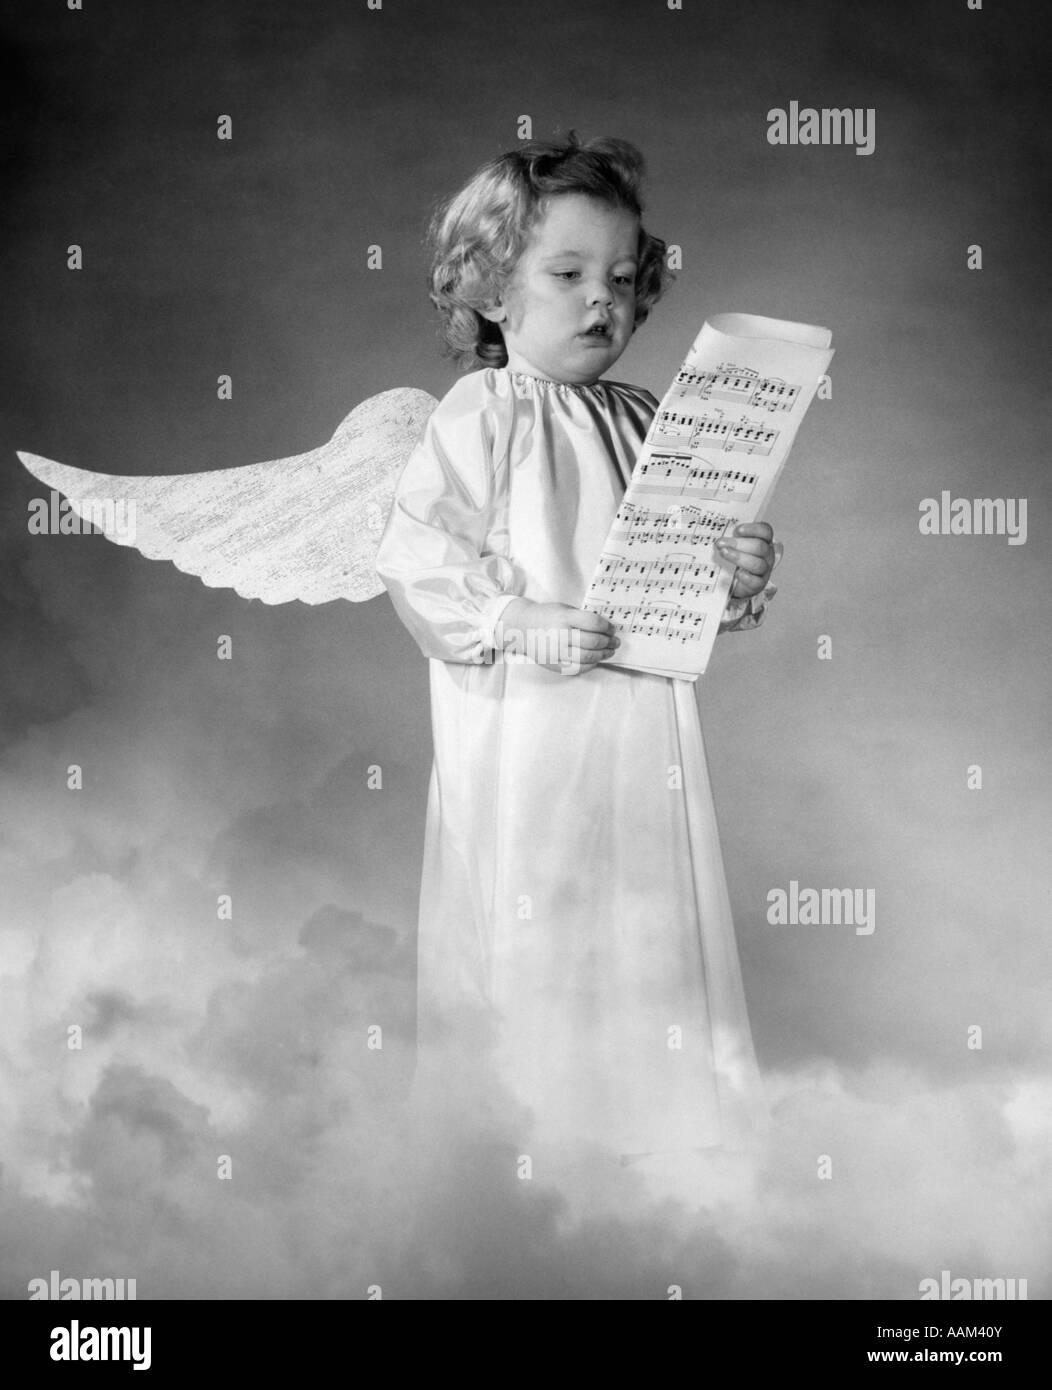 COMPOSITE PHOTO OF GIRL WITH WINGS STANDING IN CLOUDS SINGING WHILE HOLDING SHEET MUSIC WEARING A WHITE SMOCK Stock Photo